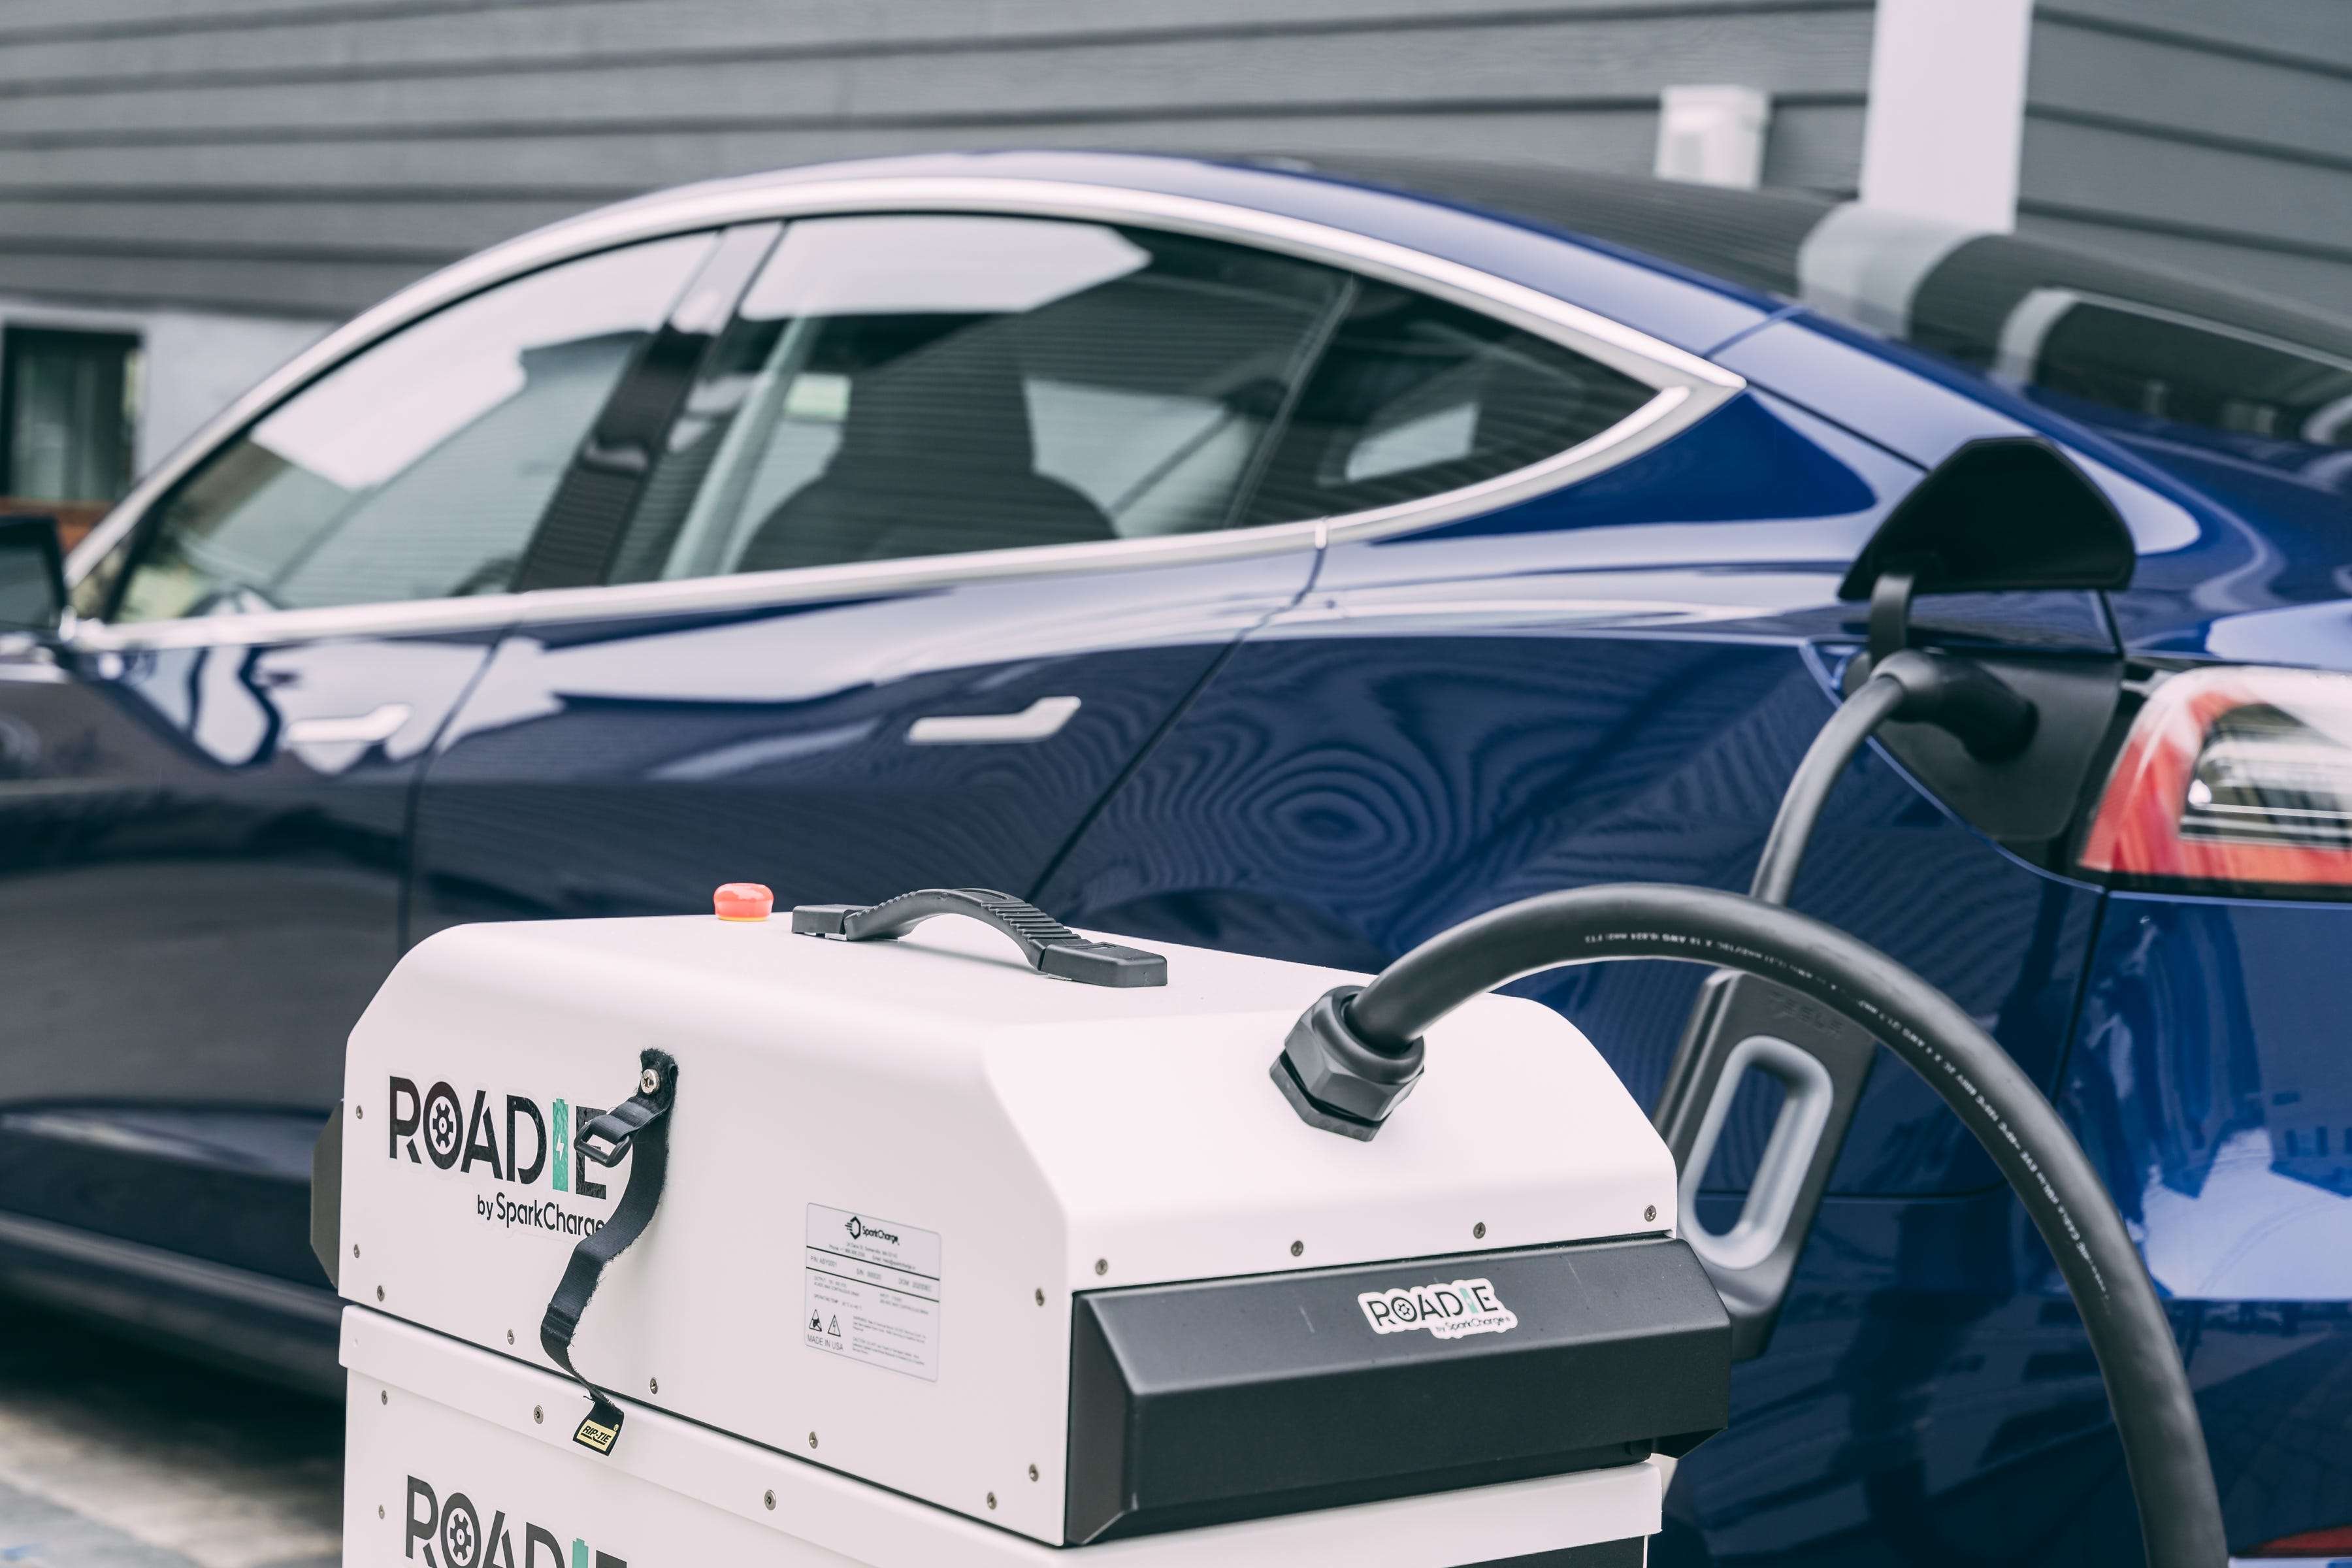 Tech startup SparkCharge to roll out an on-demand EV charging service